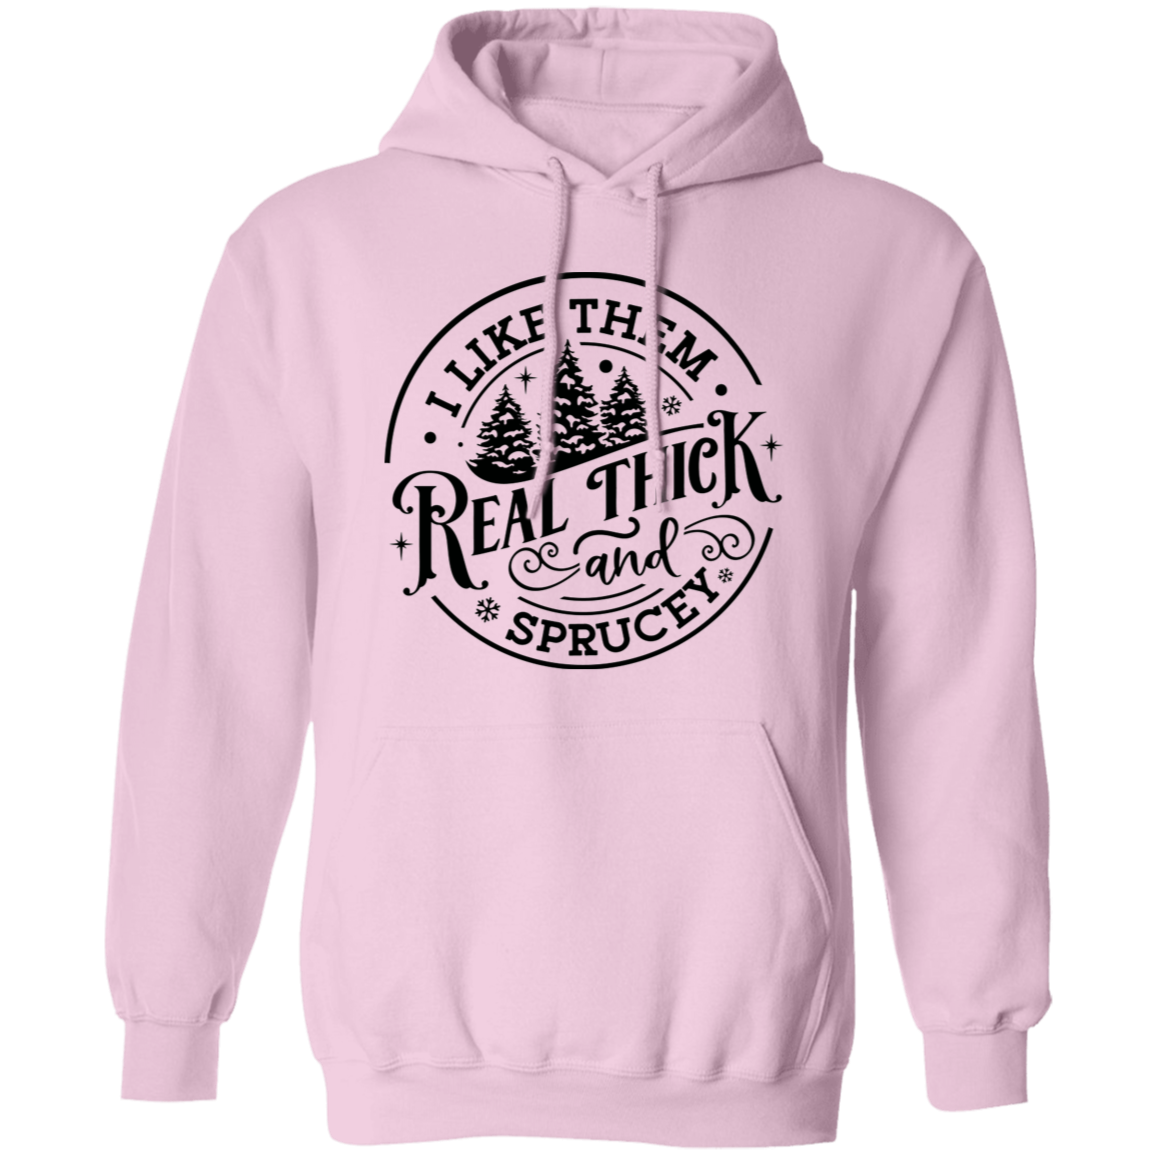 Sprucey Pullover Hoodie